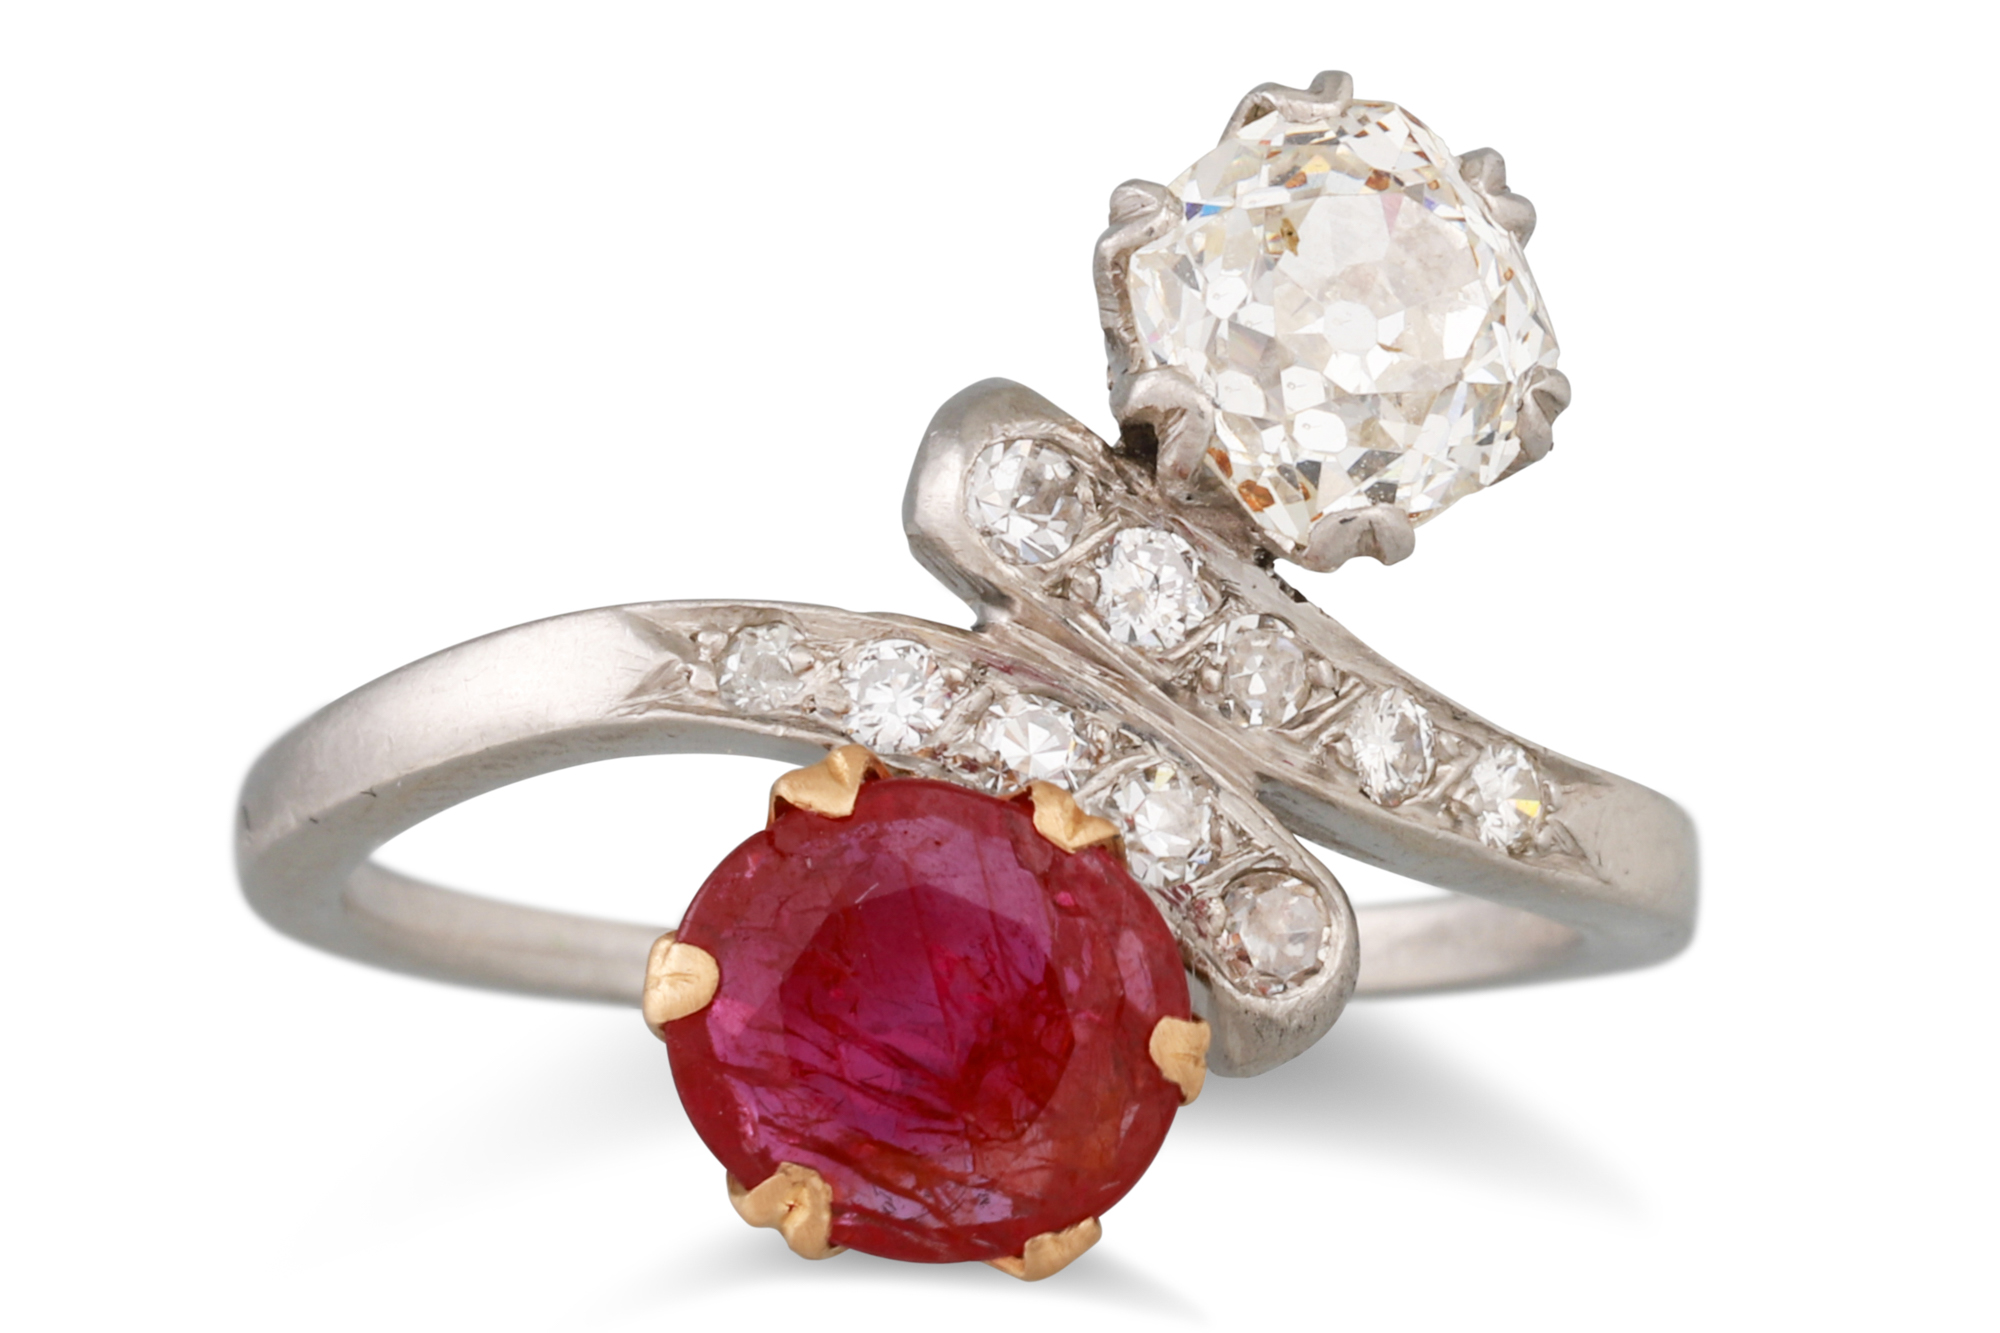 AN ANTIQUE RUBY AND DIAMOND TOI ET MOI RING, set with an old cut diamond and a circular ruby,